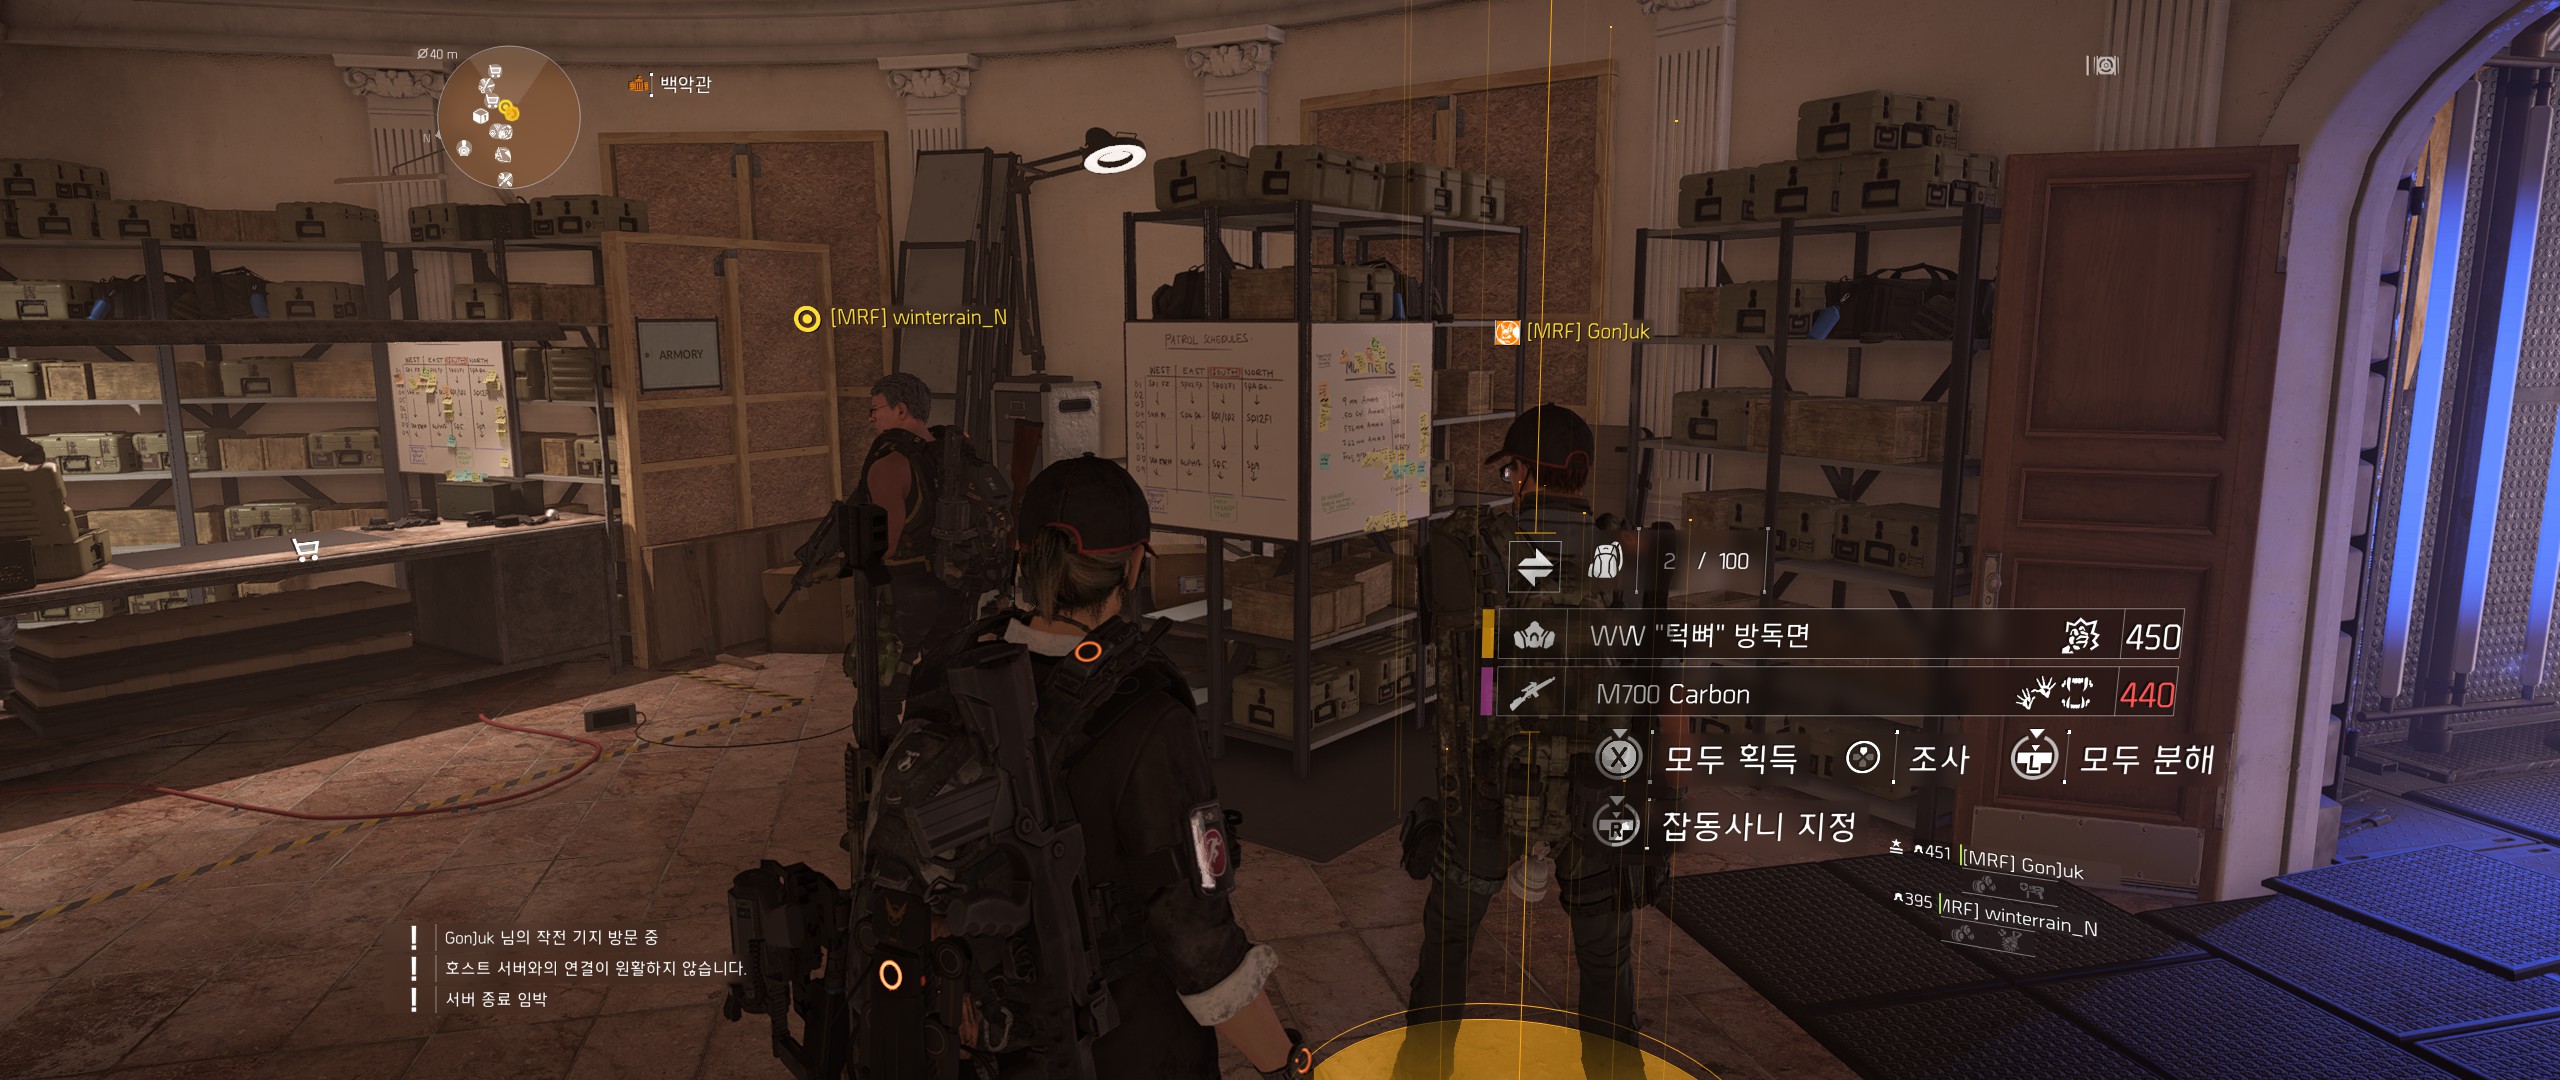 Tom Clancy's The Division® 22019-3-23-21-58-25.jpg